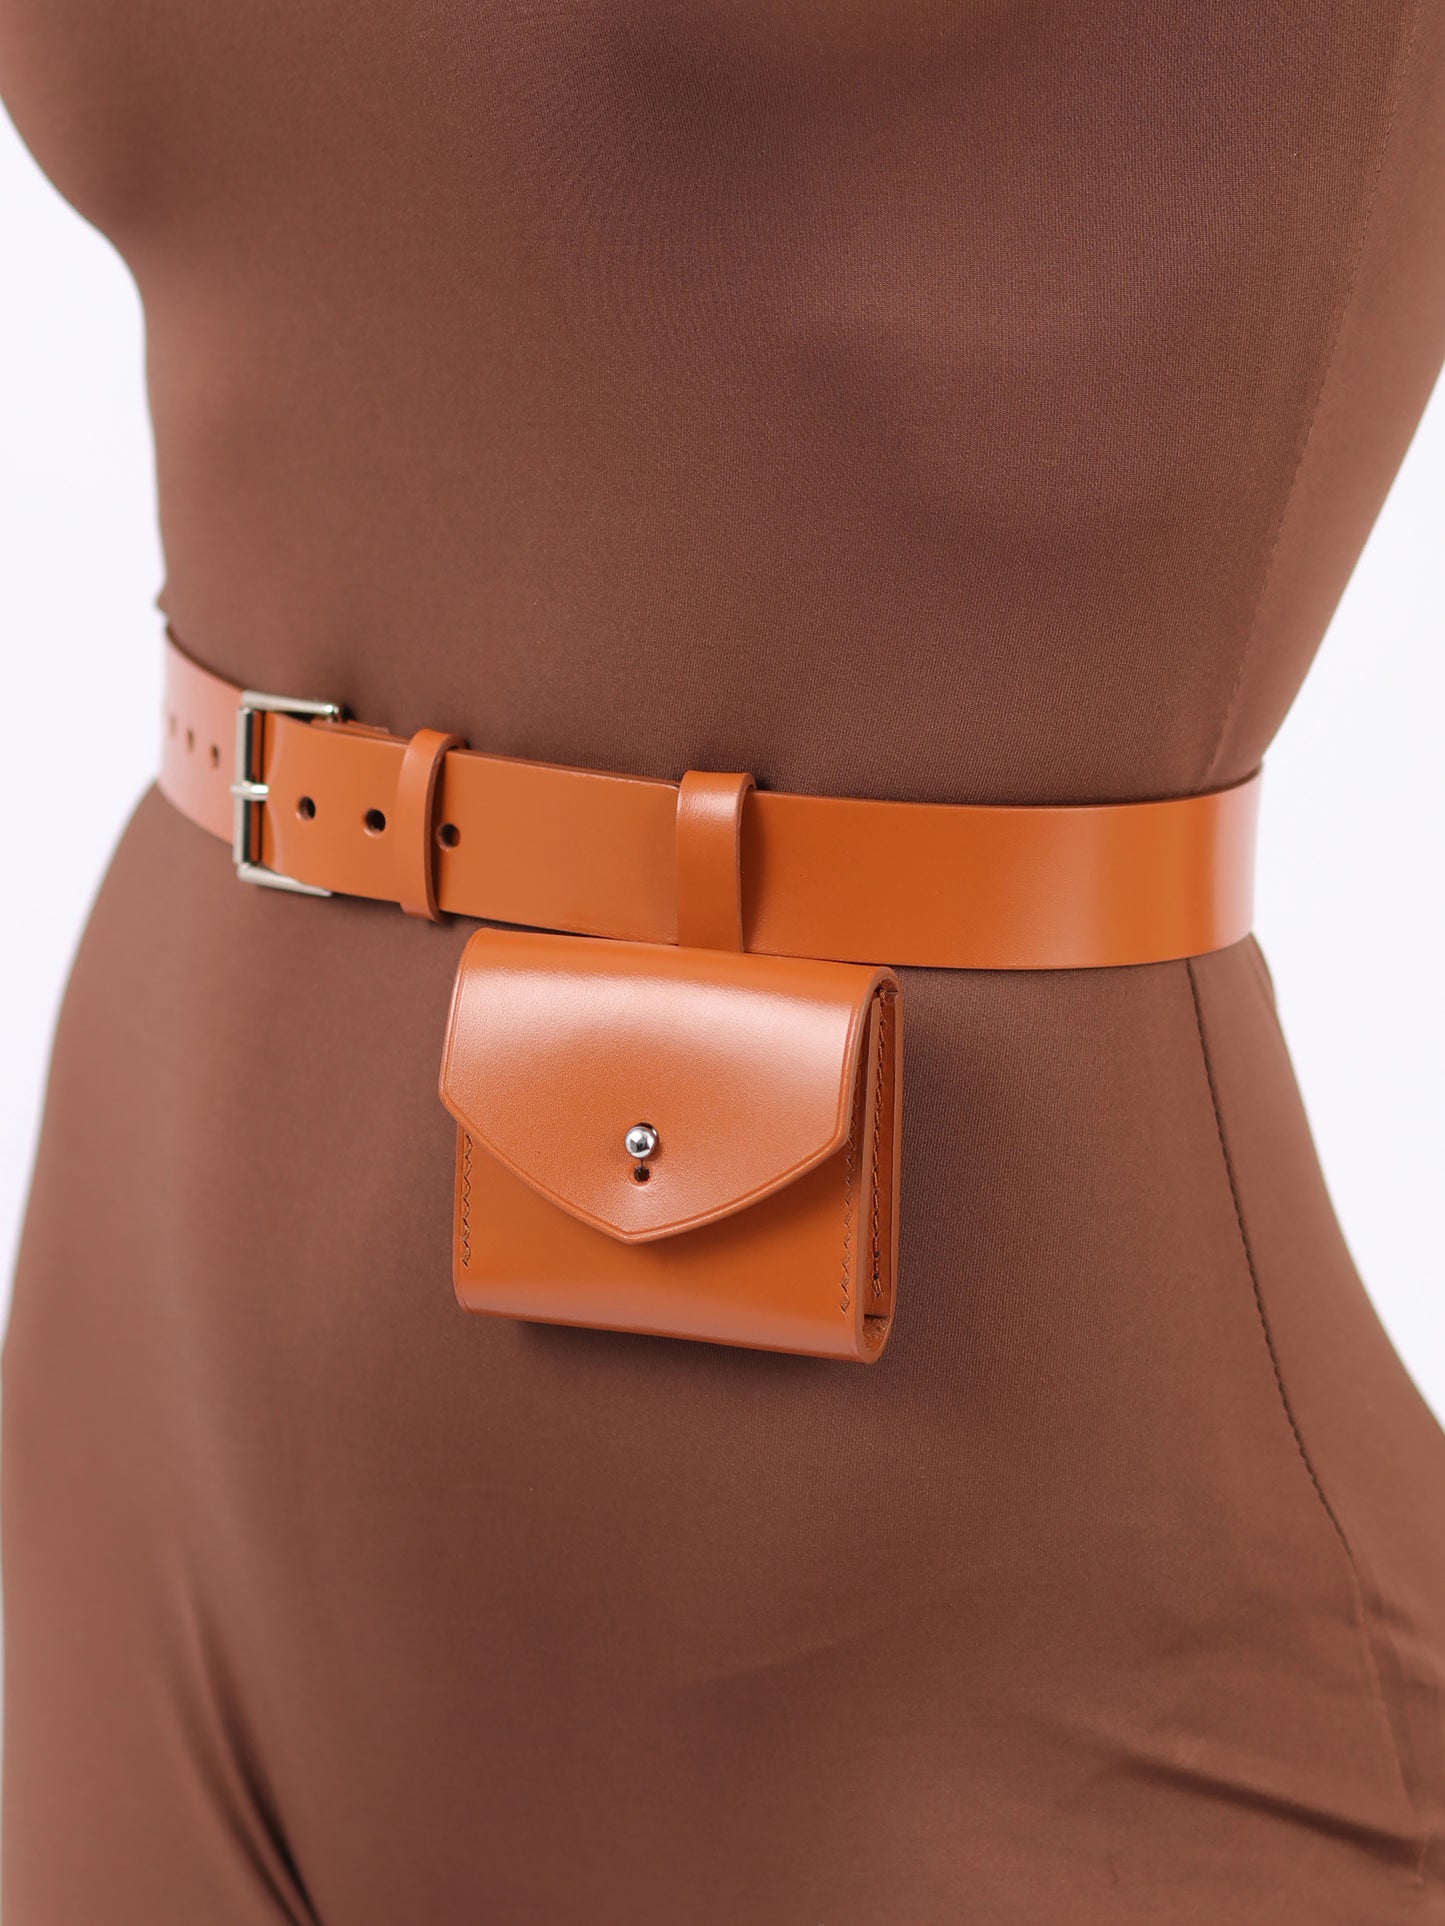 Detailed view of light brown micro belt bag.